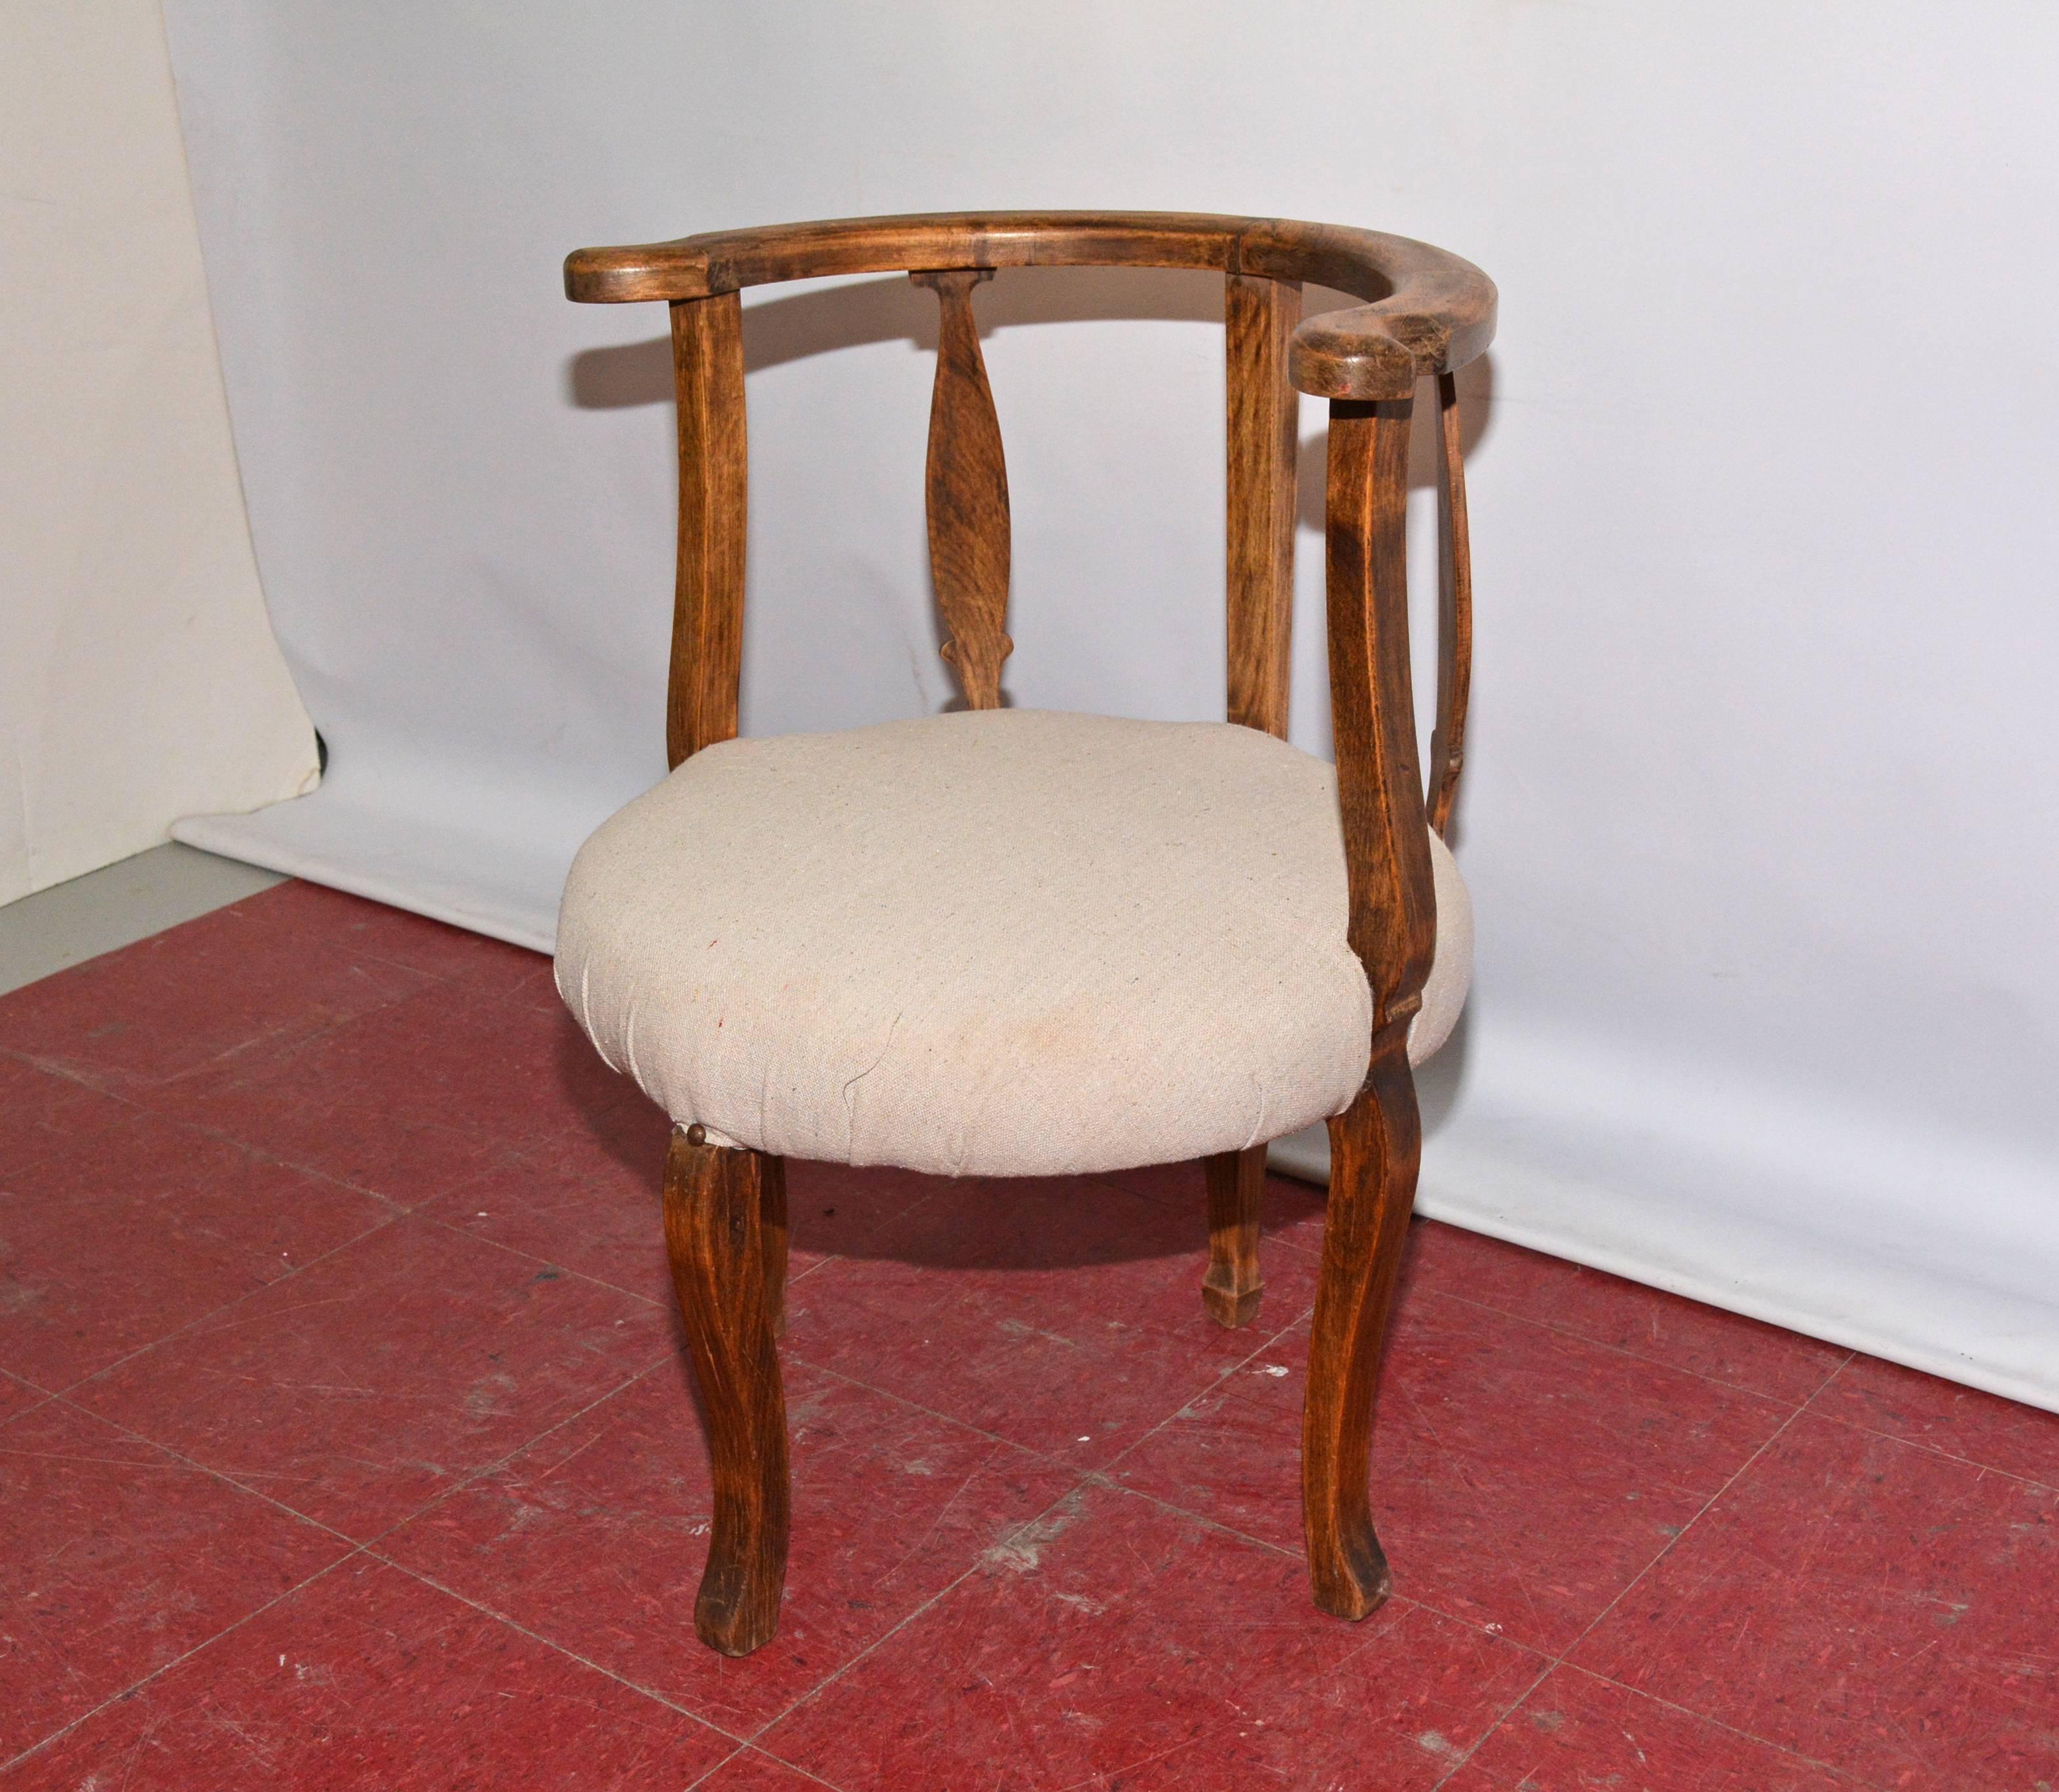 The chair is made of hardwood and has simple cabriole legs, the seat has new beige linen upholstery. Great in a bedroom or used as a vanity table chair. Arm: 27.50